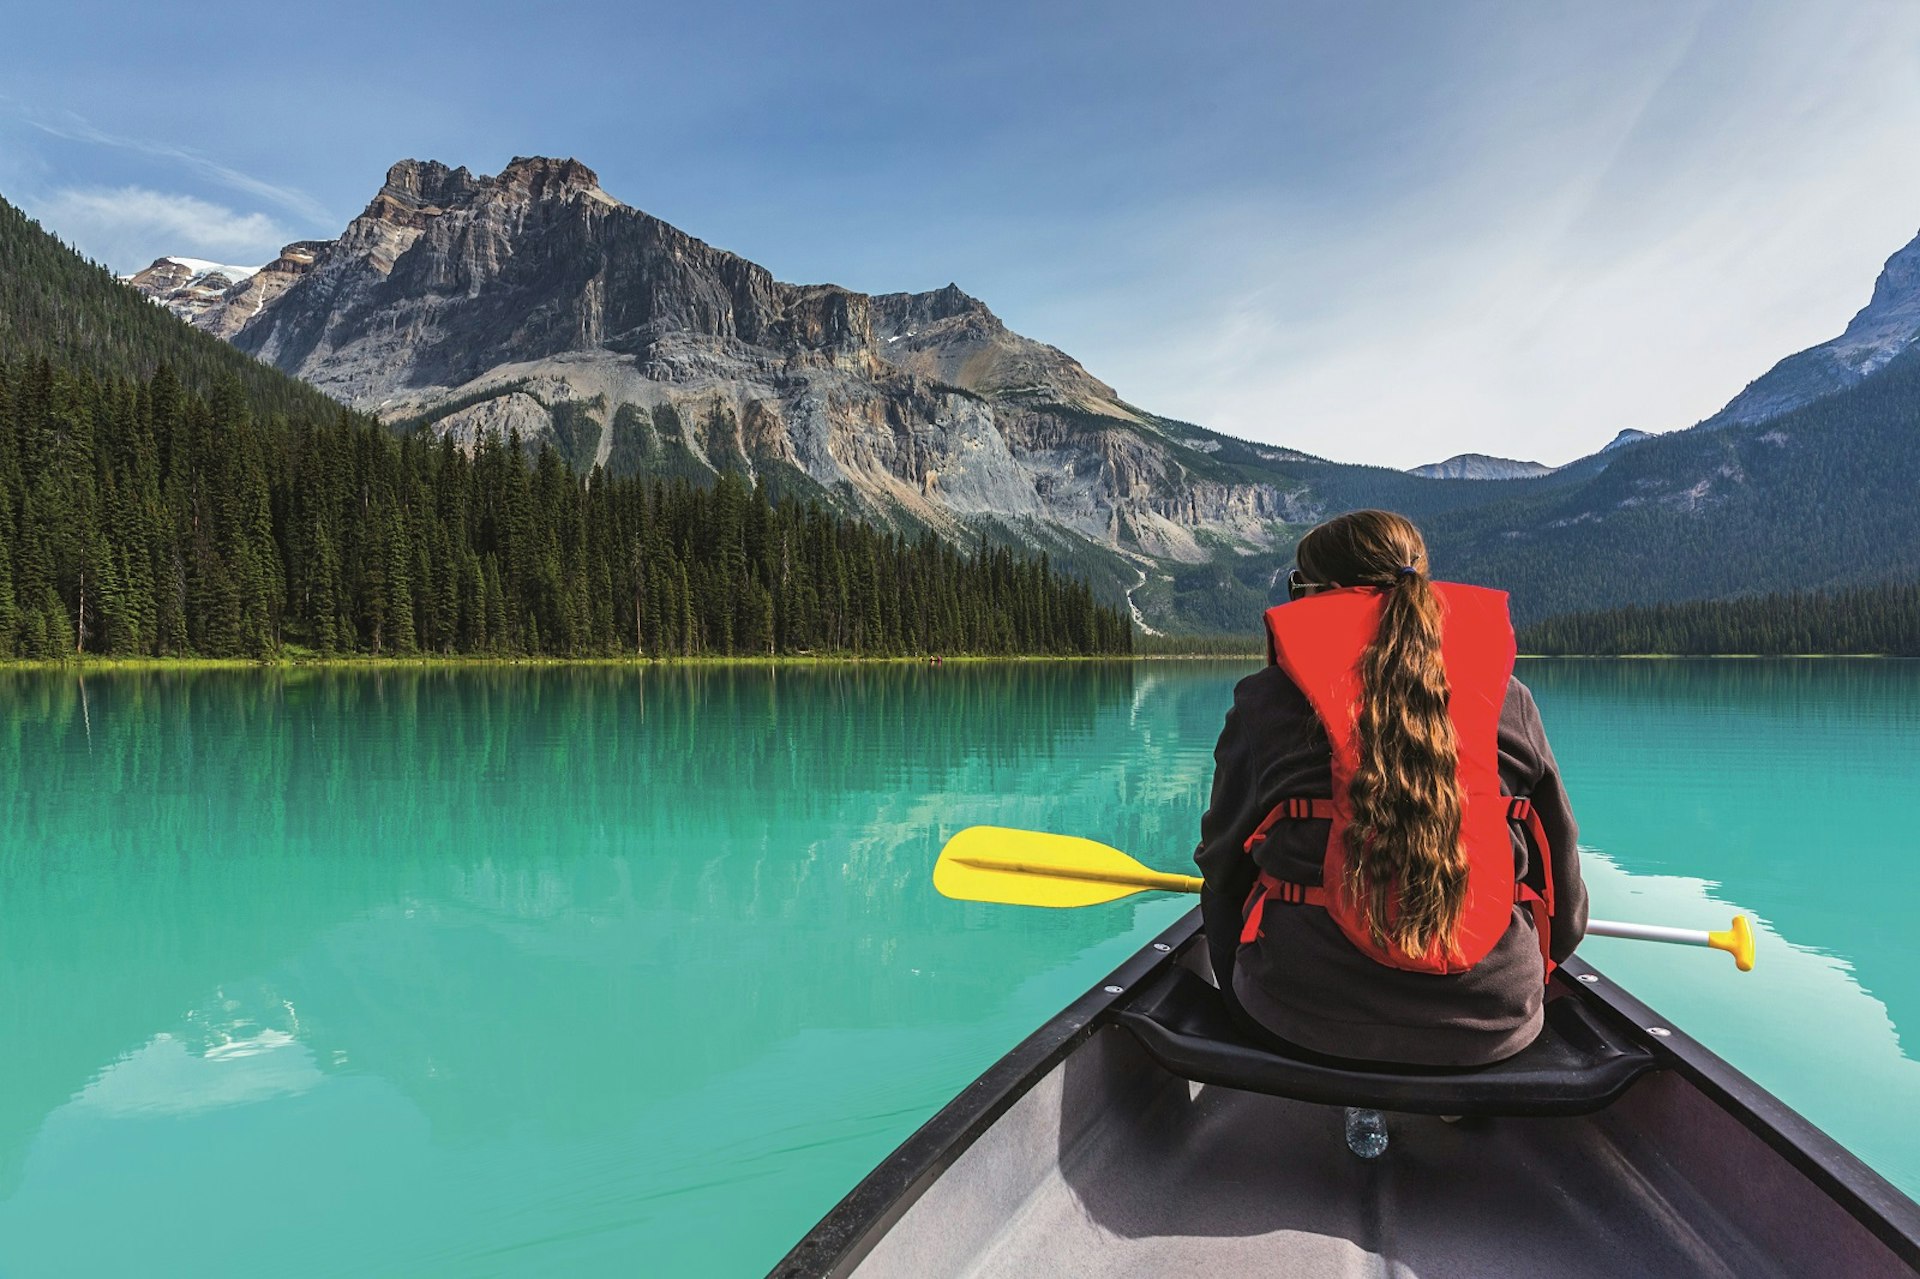 Canoeing on Emerald Lake in summer at the Yoho National Park © R.Classen / Shutterstock